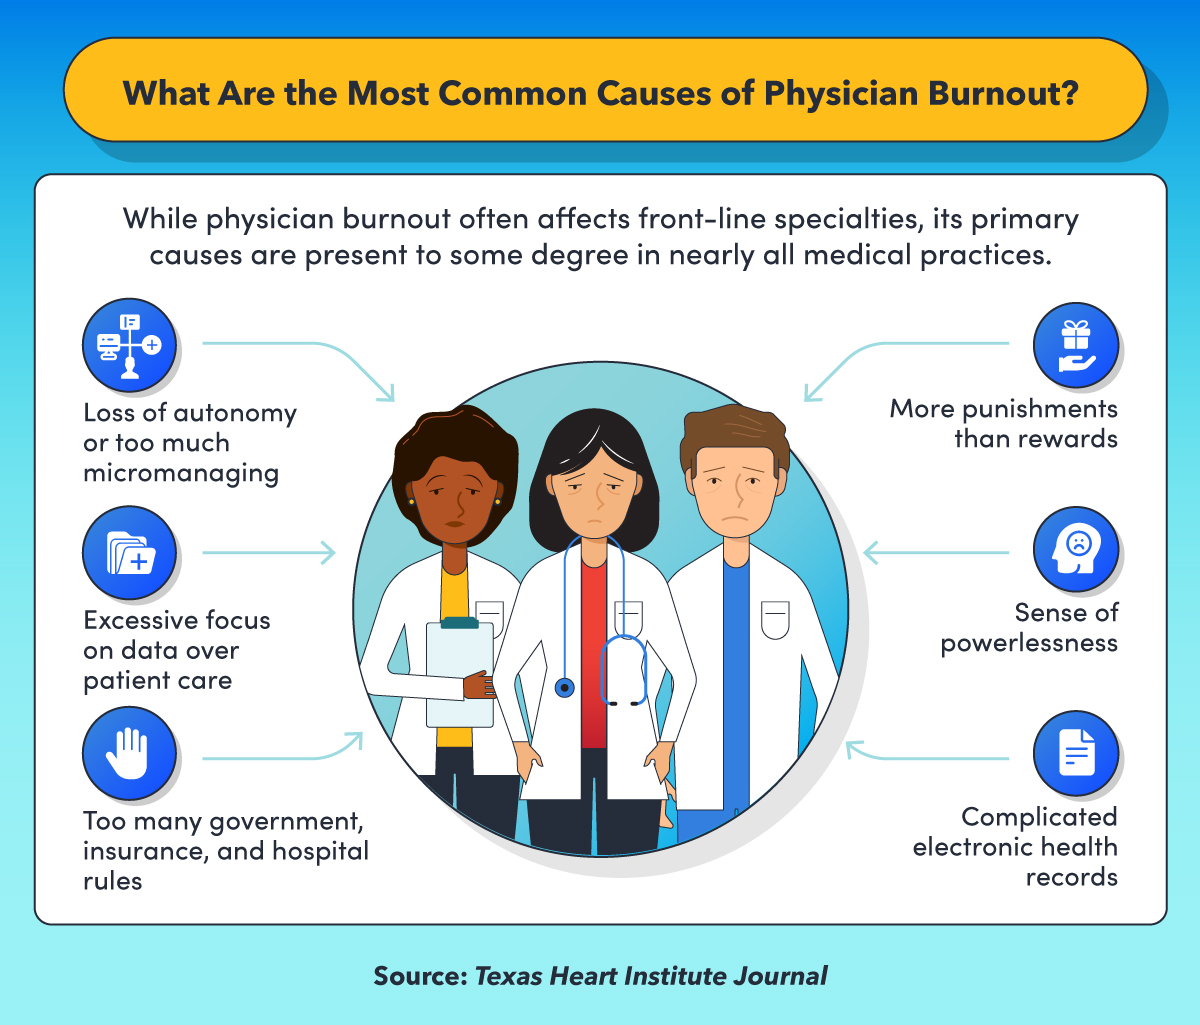 Six causes of burnout that affect physicians across all specialties.